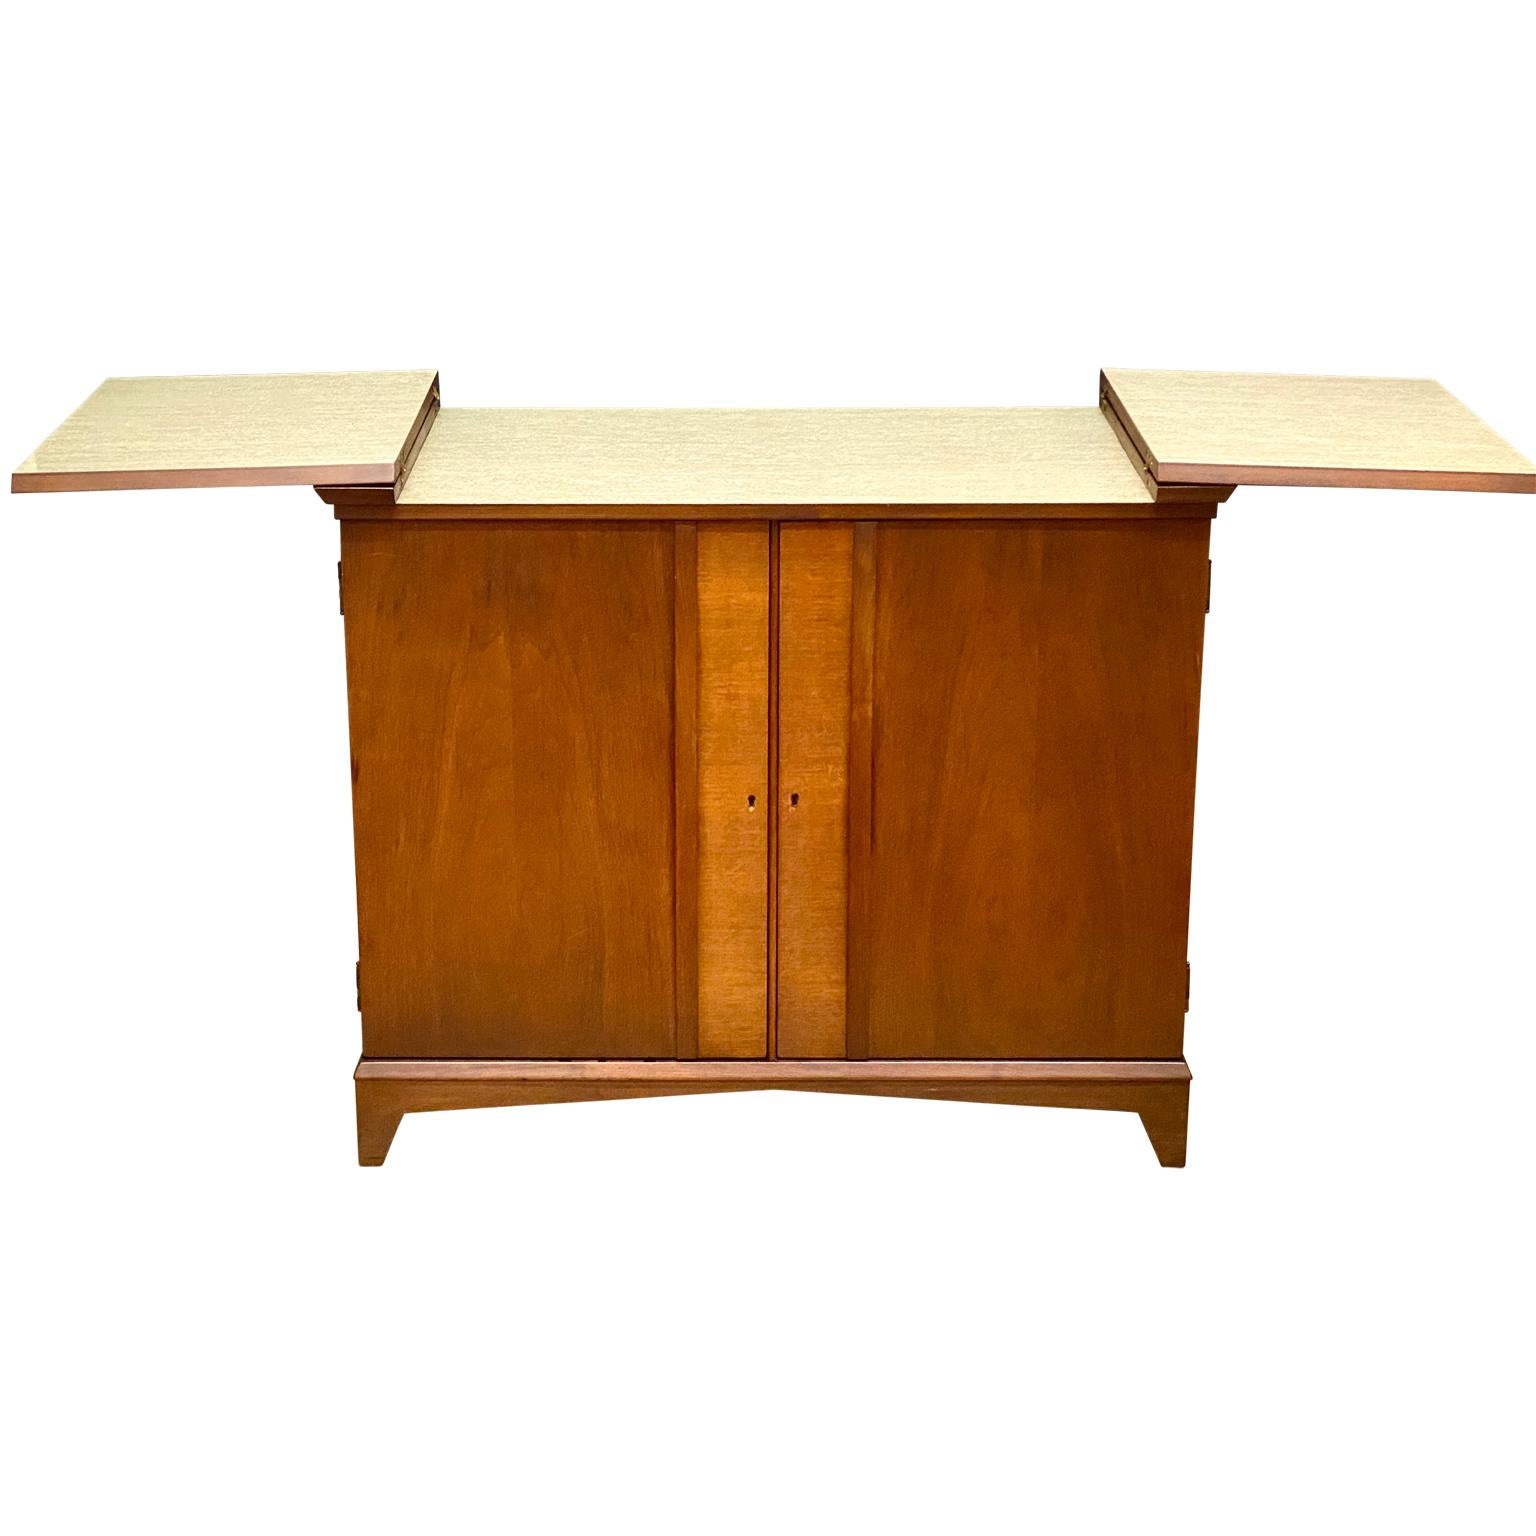 Danish Mid-Century Modern dry bar table with folding leaves.

This amazing dry bar has two fitted the doors for glasses and internal storage for wine and liquor bottles. The folding leaves are covered in the original linoleum upholstery.